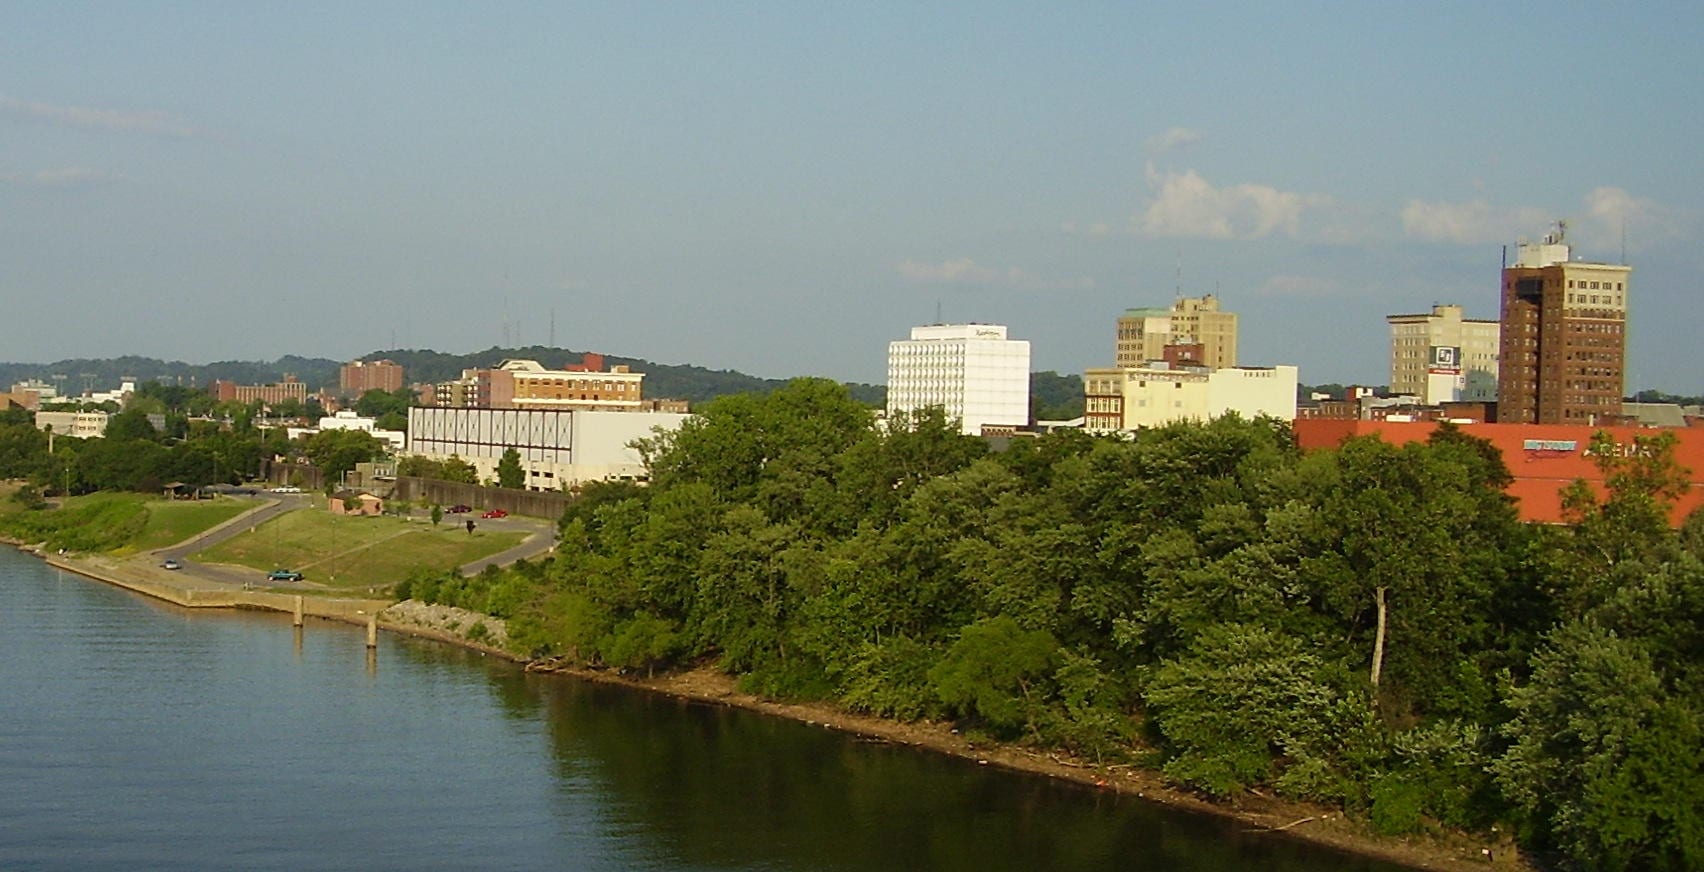 Skyline and trees of Huntington West Virginia as seen from the river